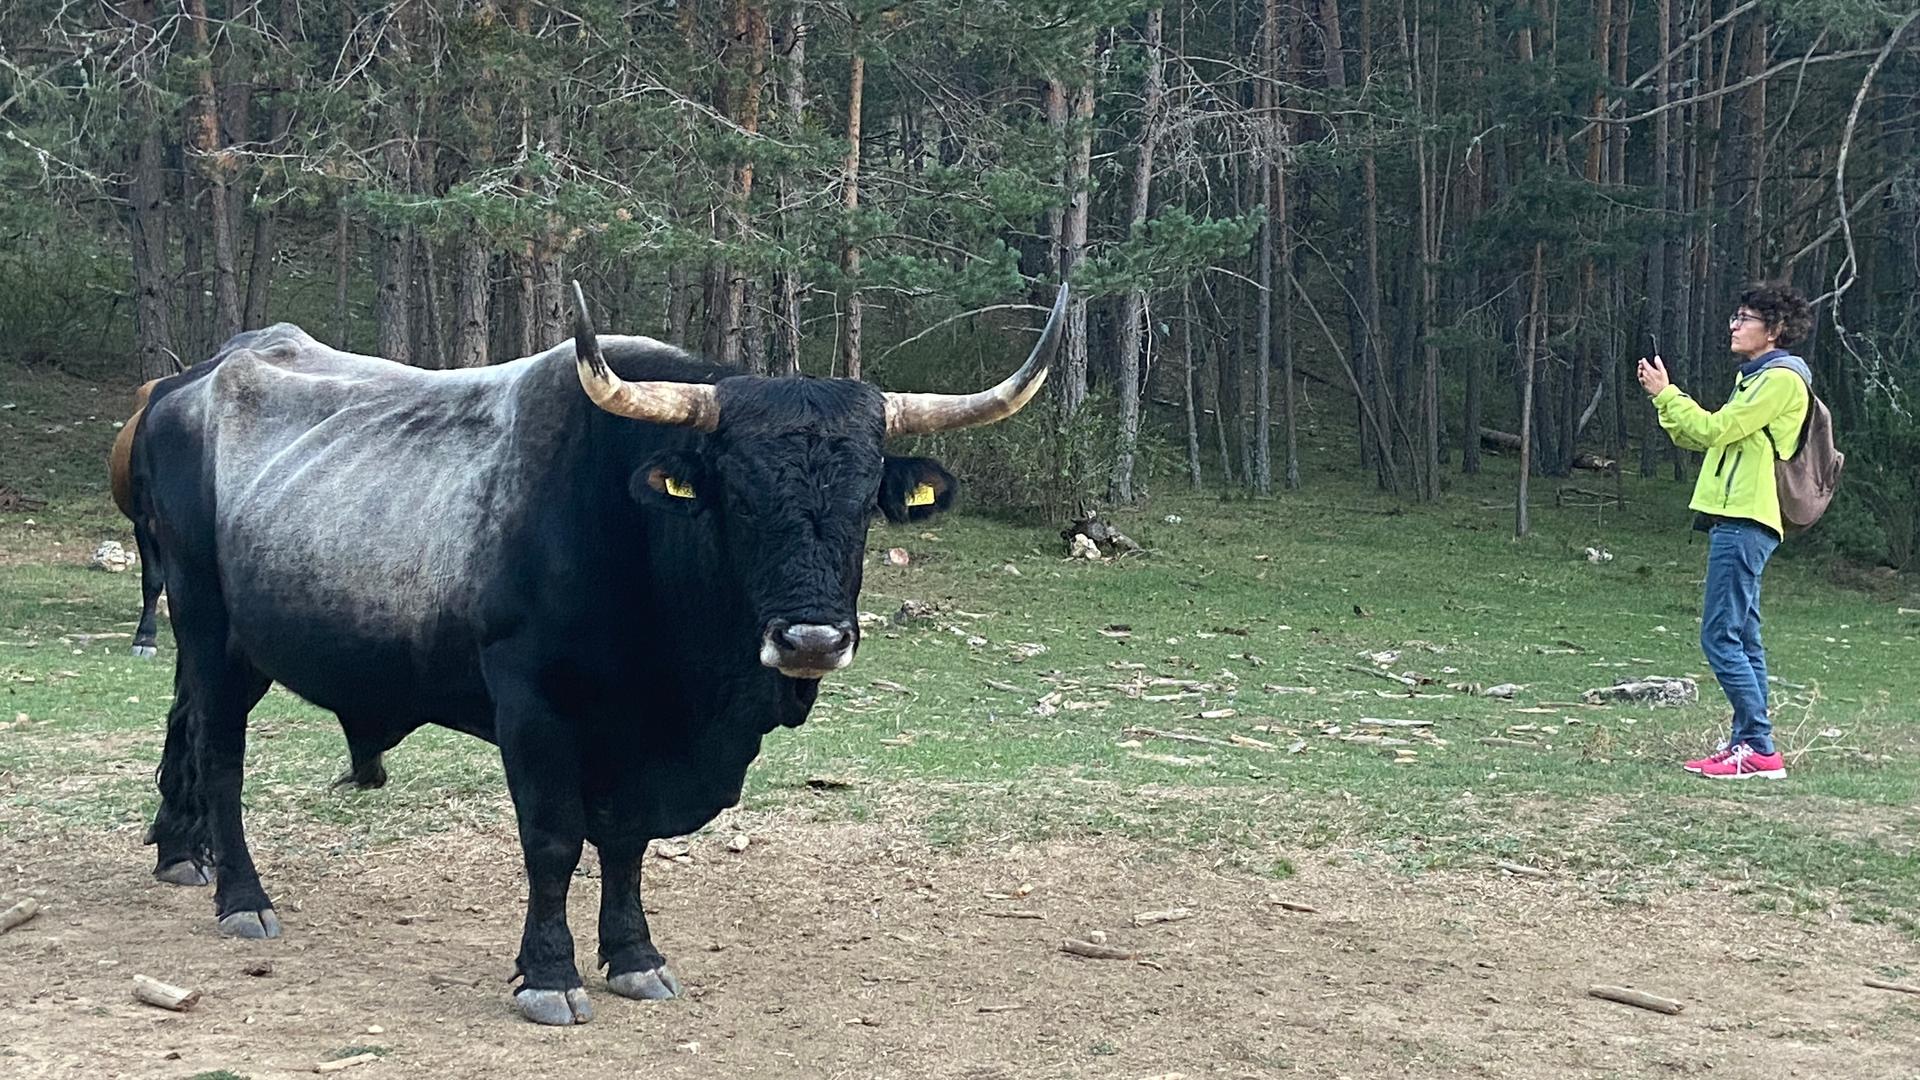 The aurochs, whose horns can reach 7 feet in the air and which can weigh up to 2,500 pounds, are now Europe’s largest herbivore. They fell small trees when they walk through forests, helping let in sunshine to overly dense woods.